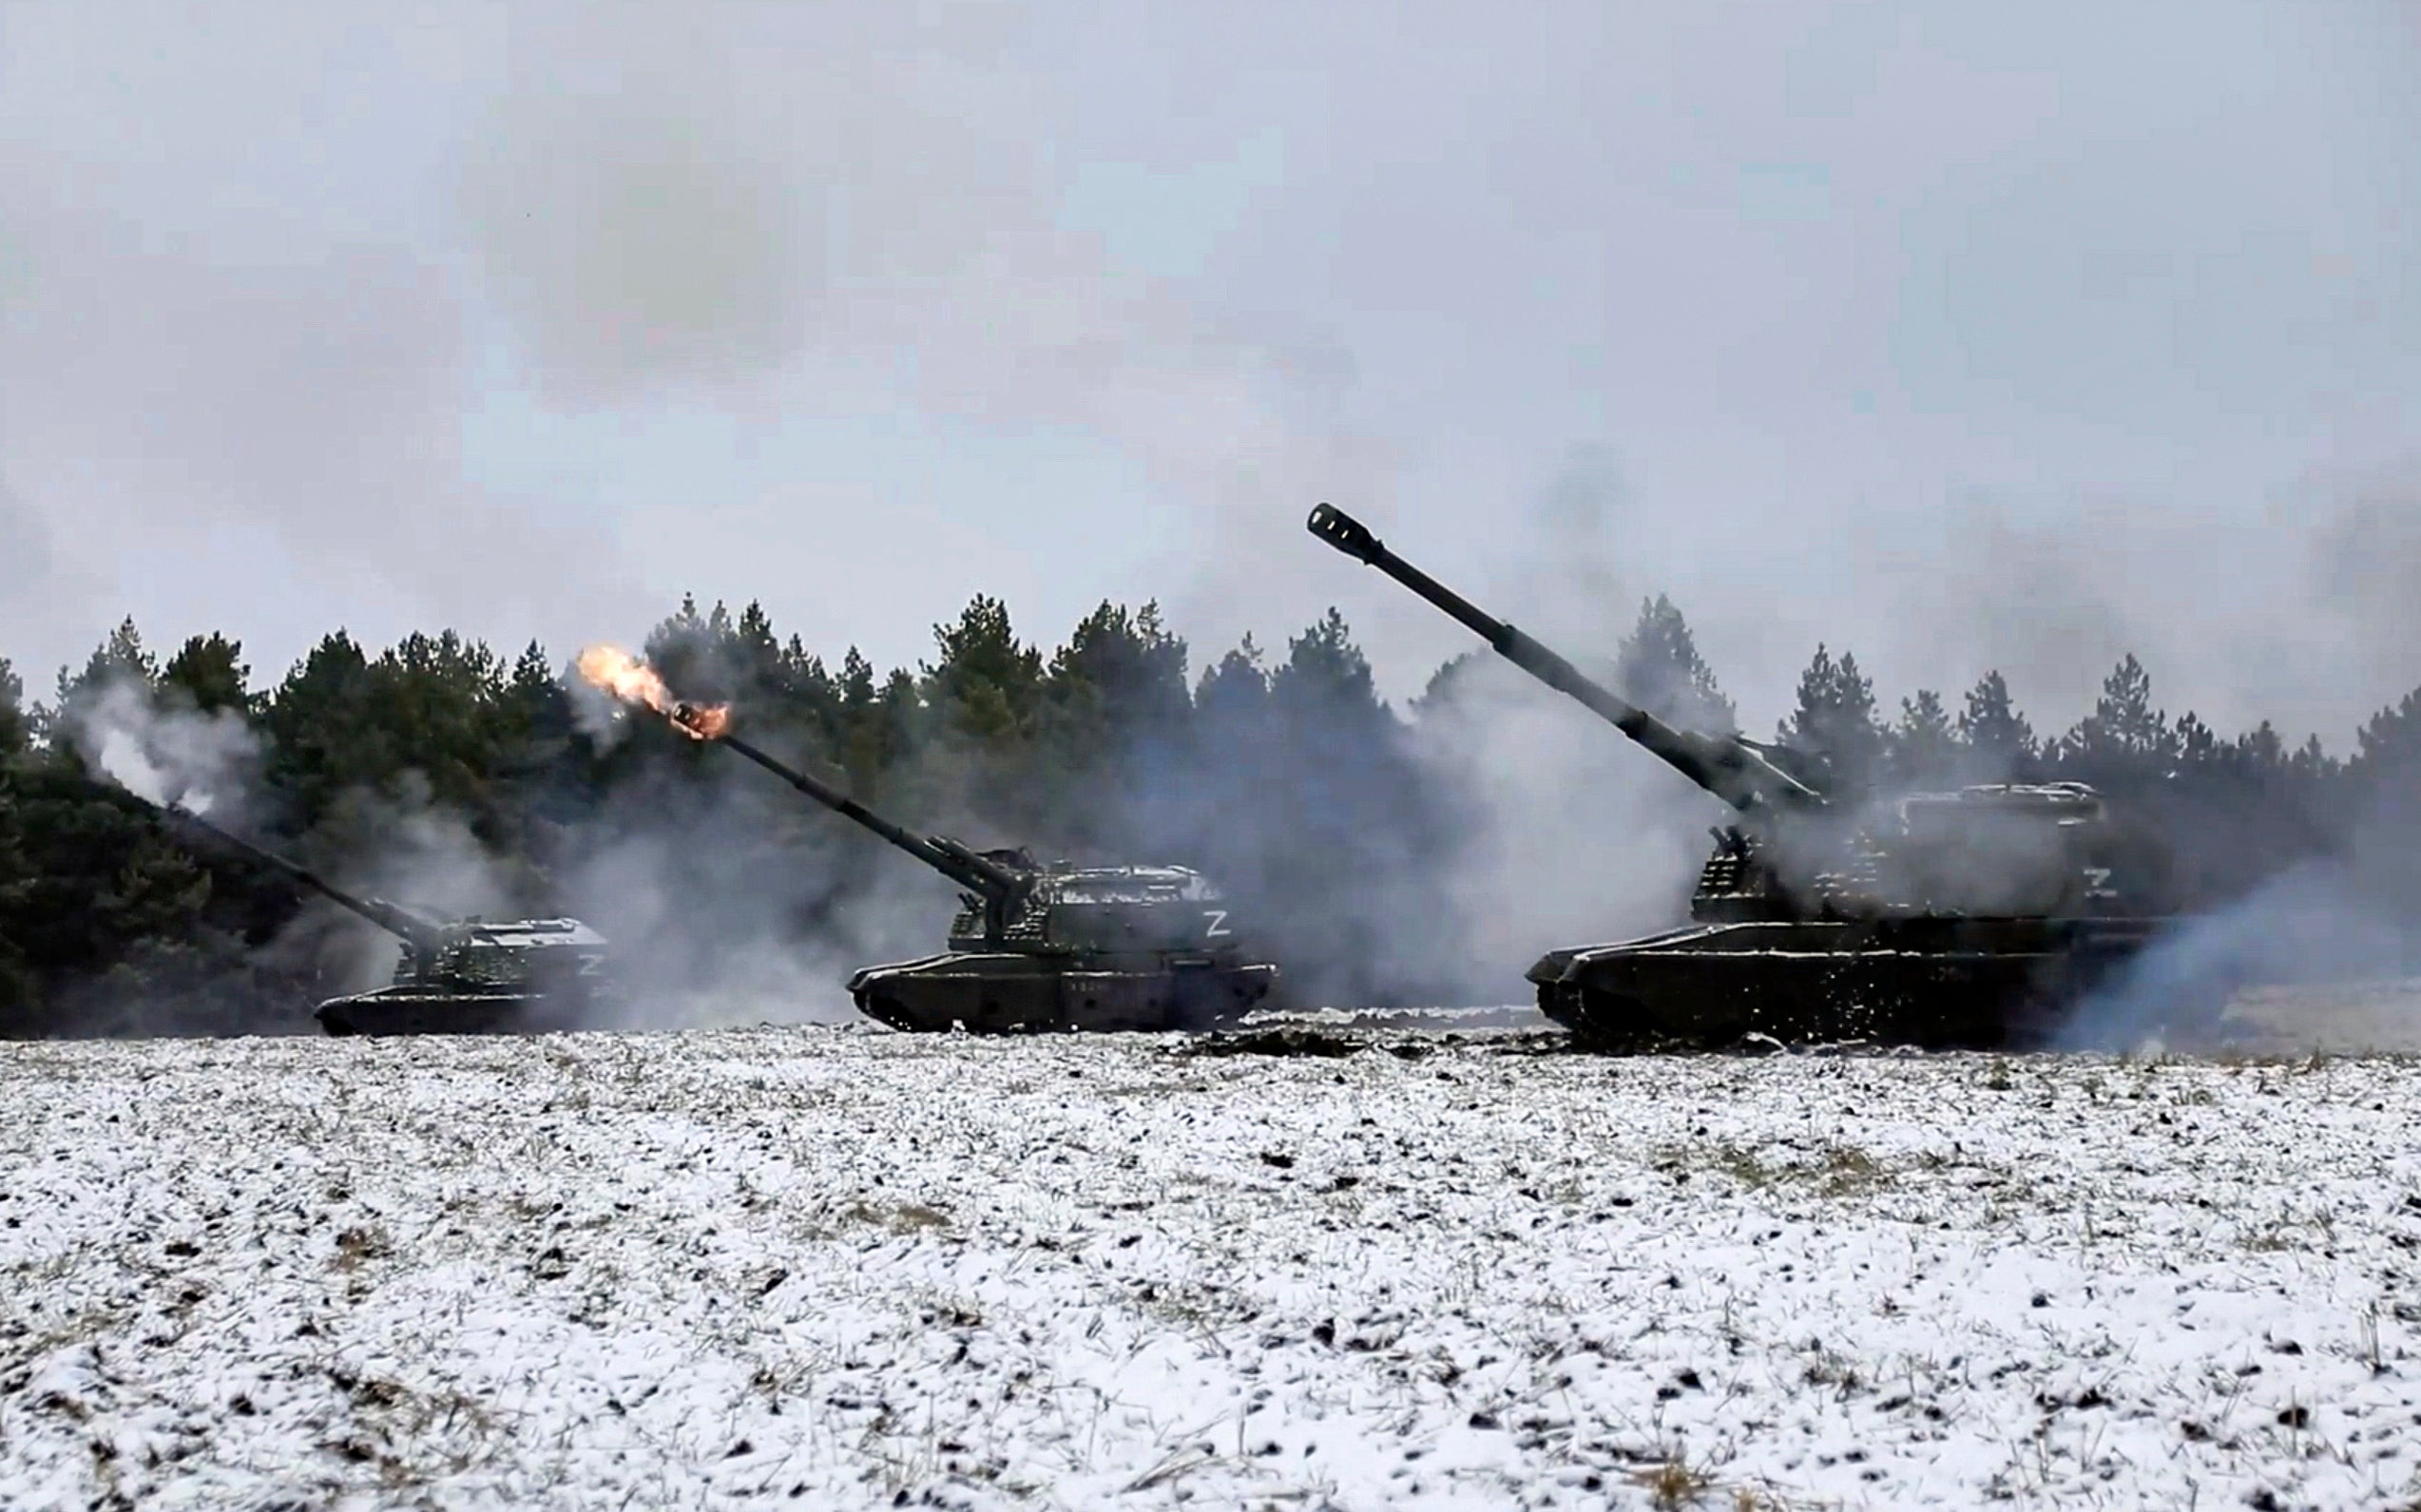 Russian self-propelled 152.4 mm howitzers Msta firing during combat in Donetsk